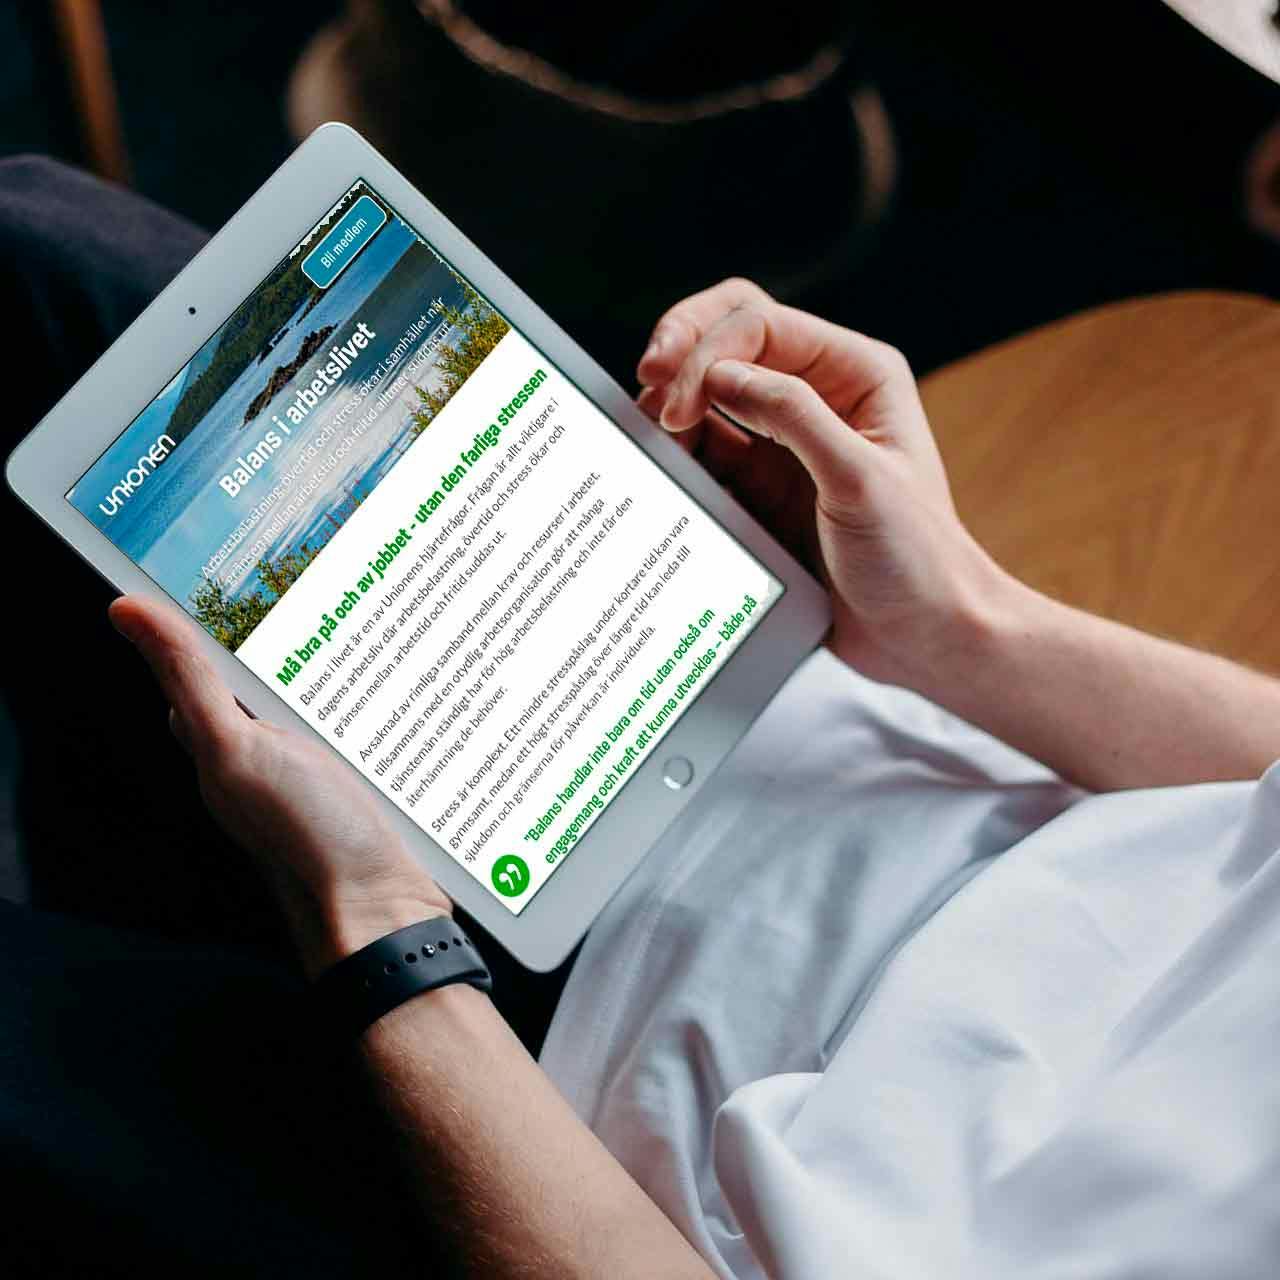 A man sitting on a sofa with an iPad on his lap, browsing Unionen's website.